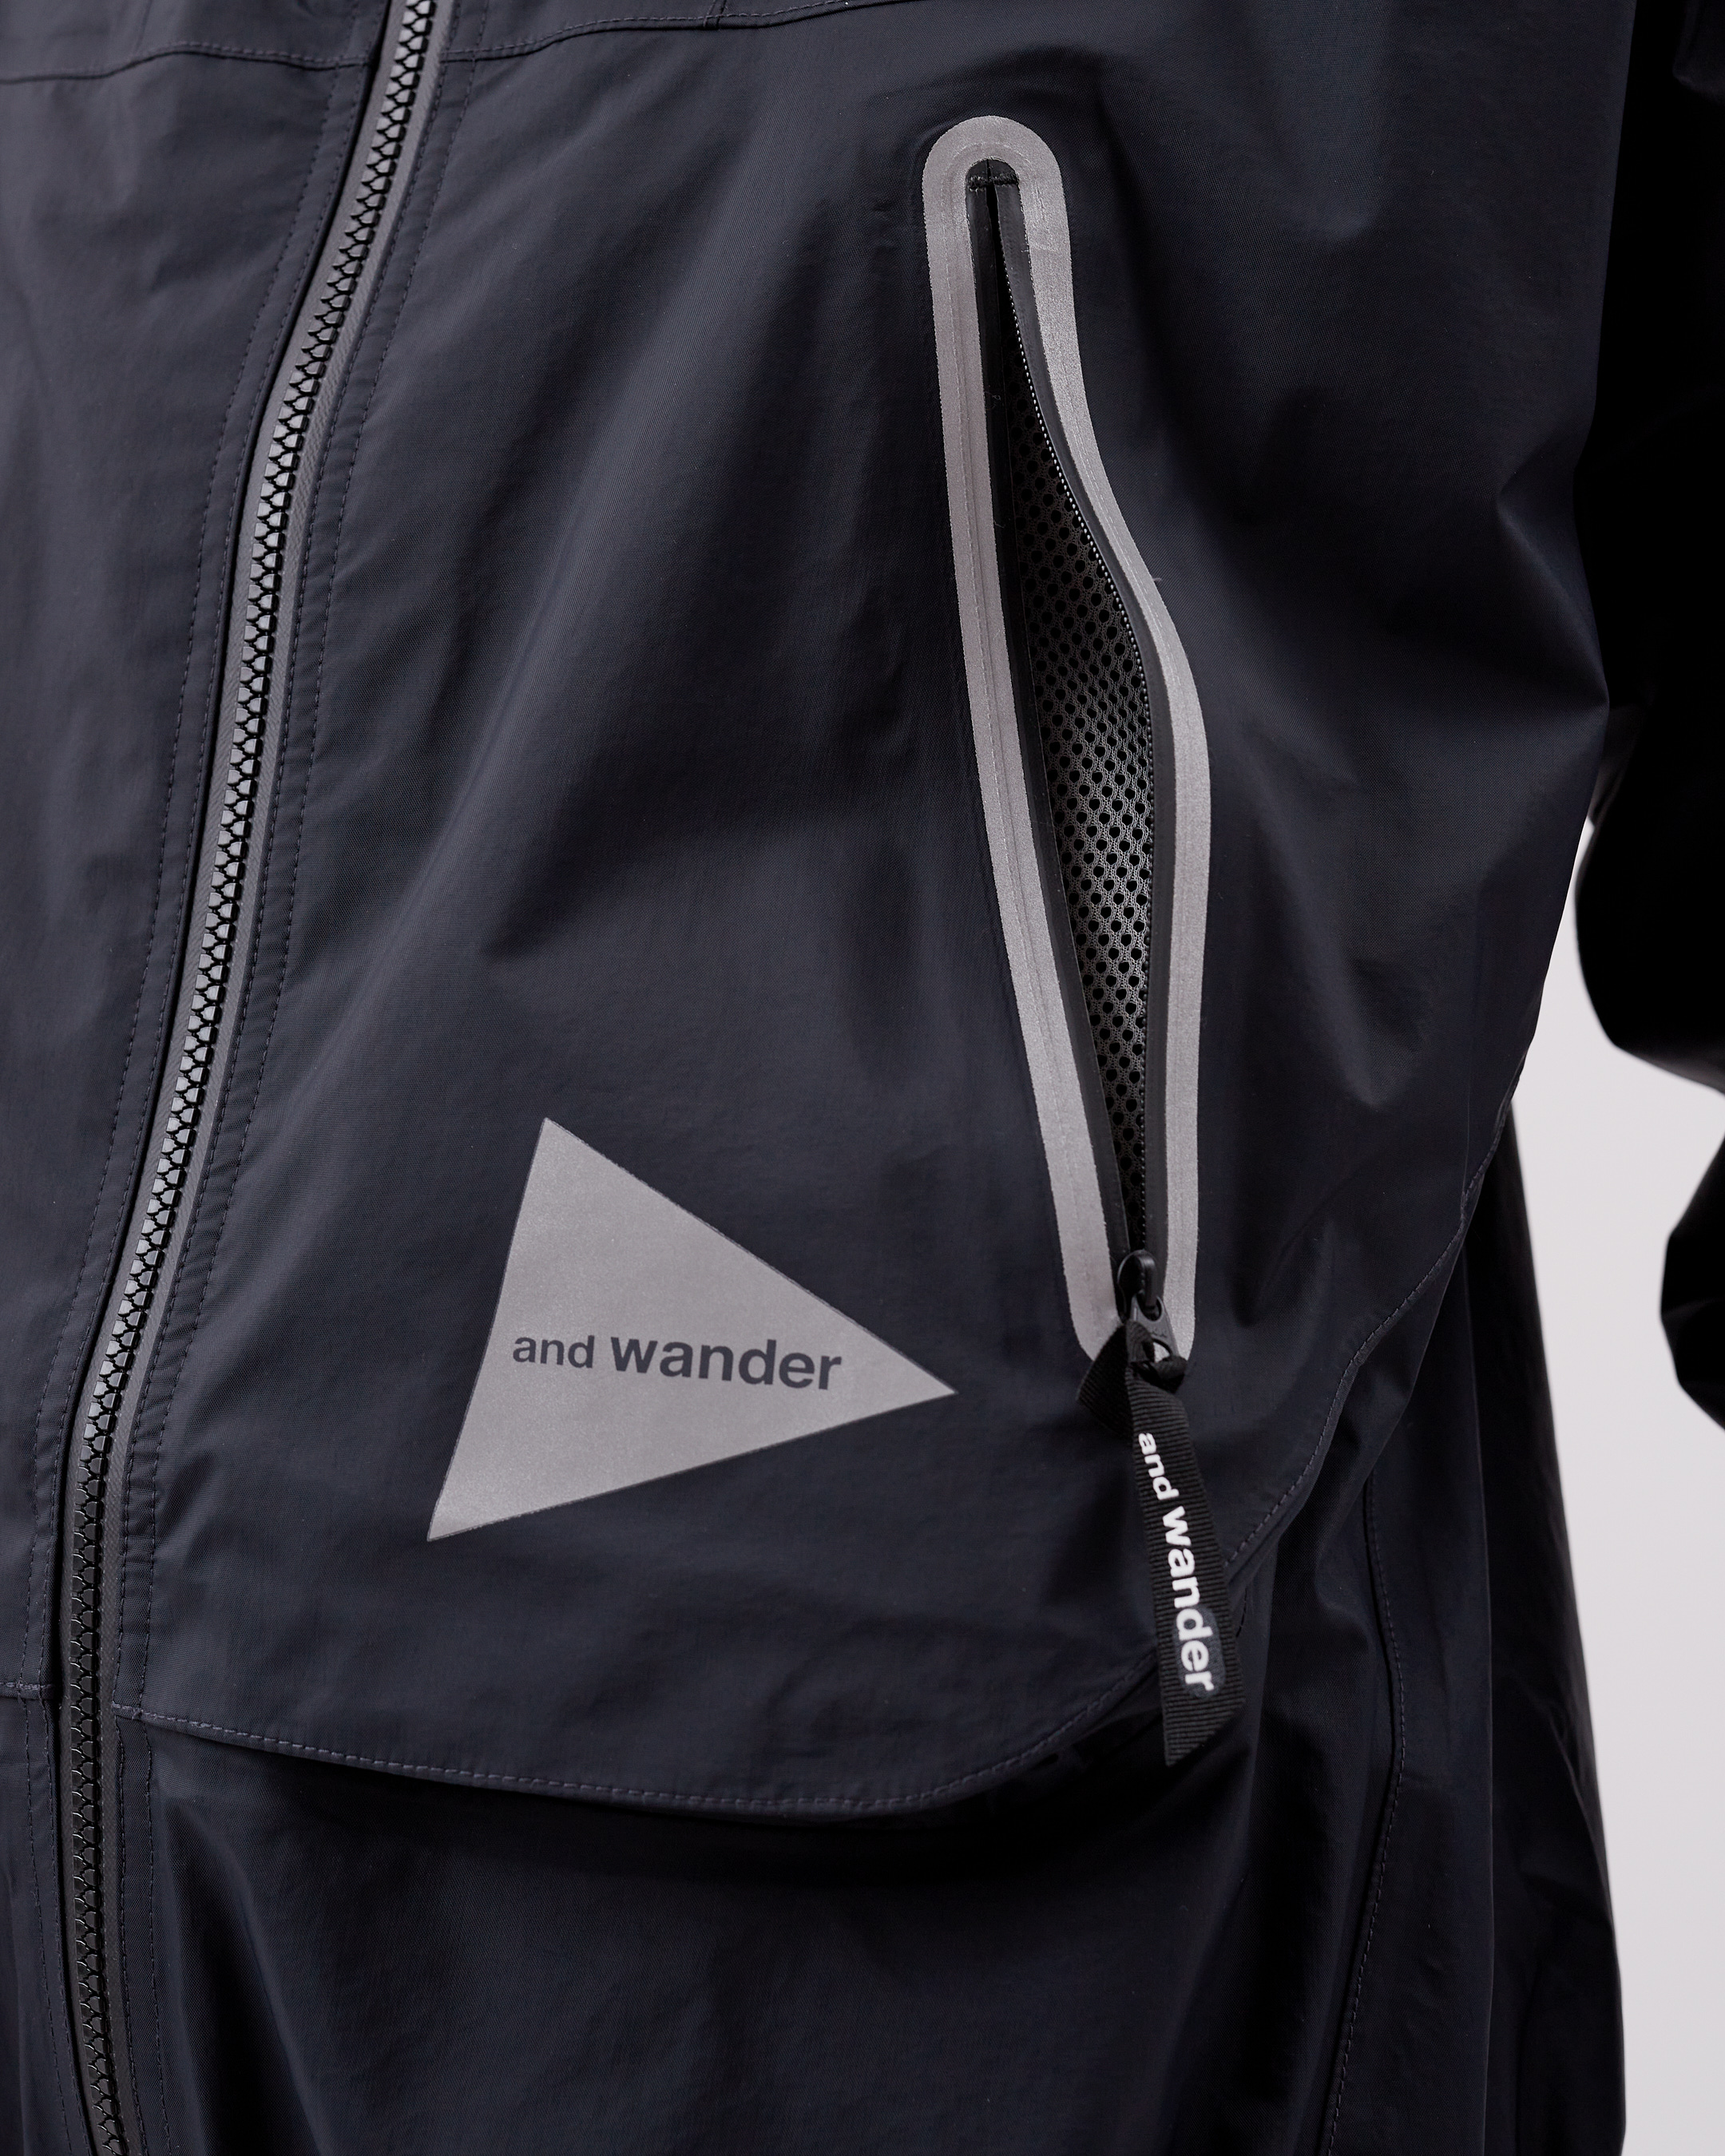 Norse Store | Shipping Worldwide - And Wander Loose Fitting Rain Jacket ...